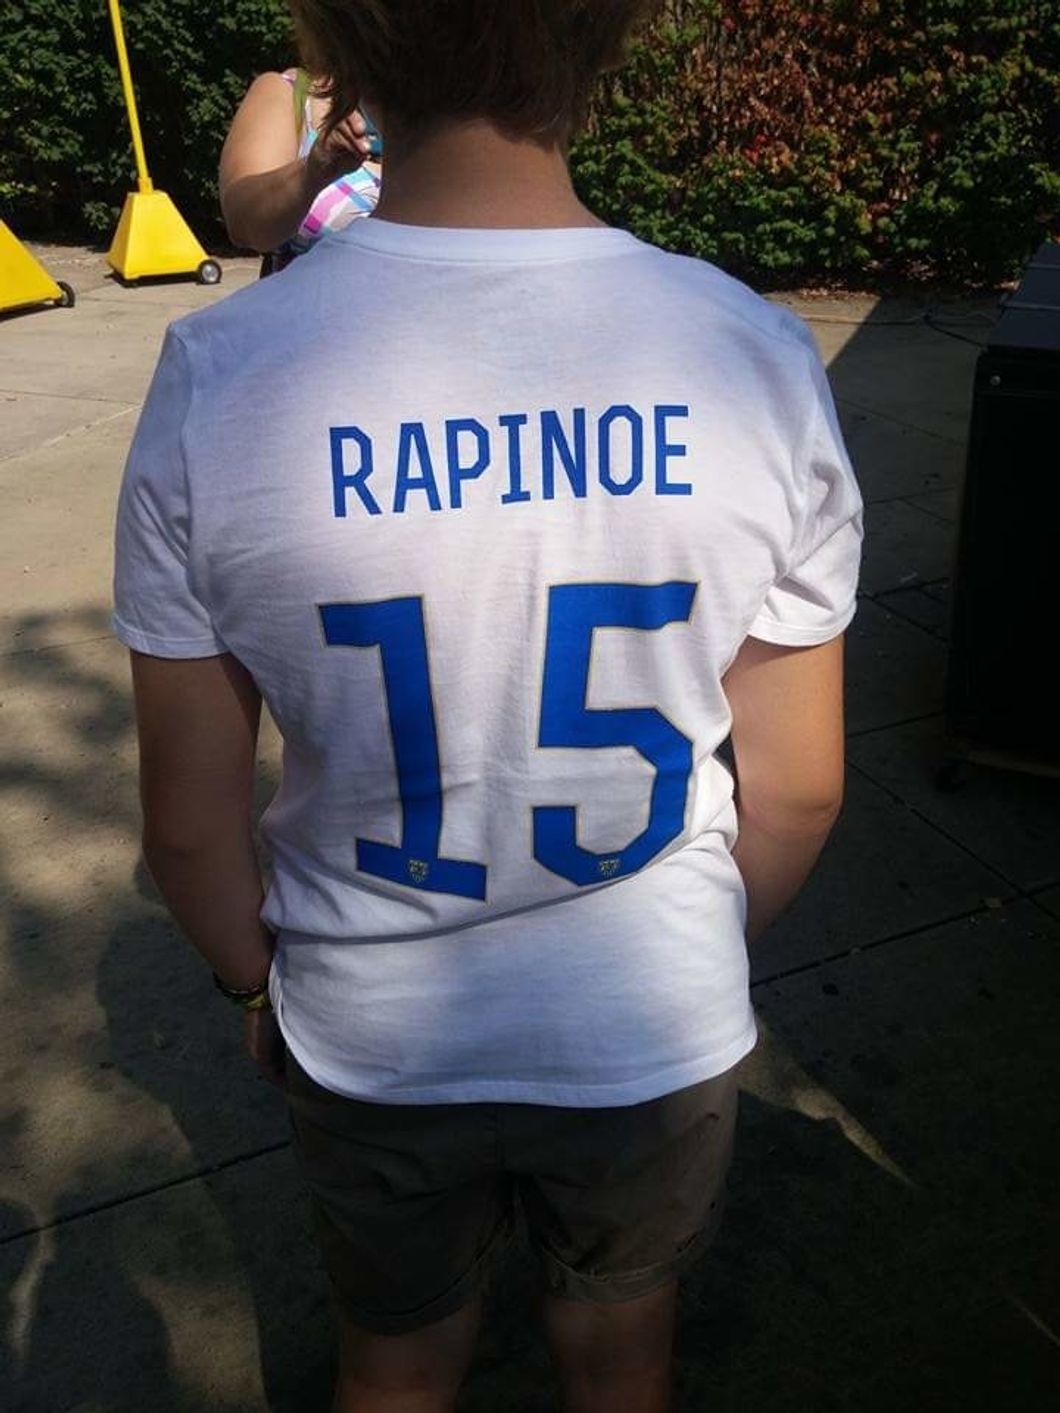 Megan Rapinoe Is Taking A Stand And I Applaud Her